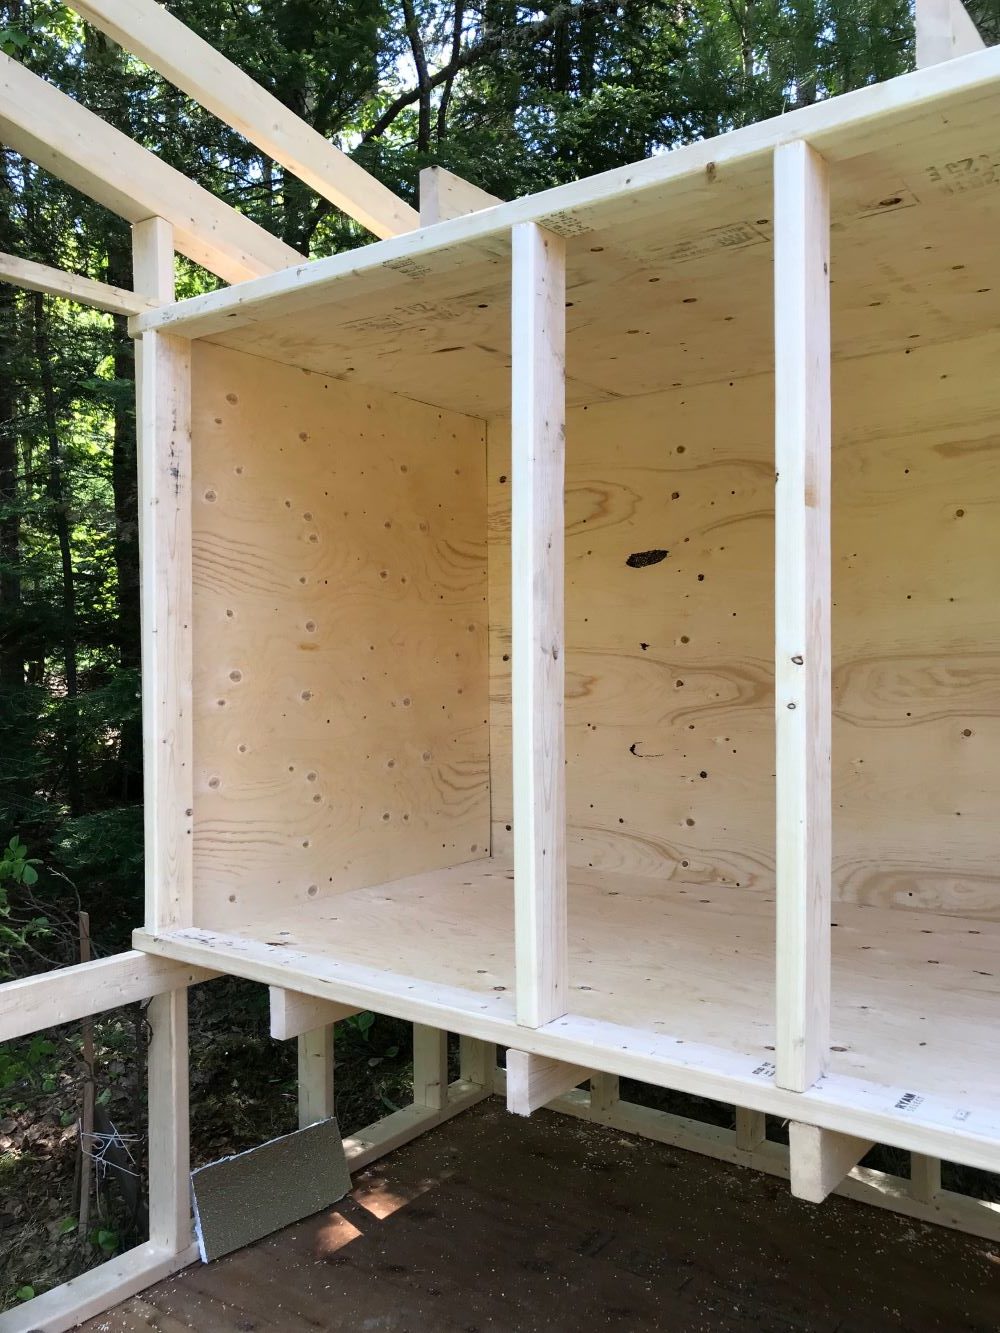 How to Construct a Chicken Coop